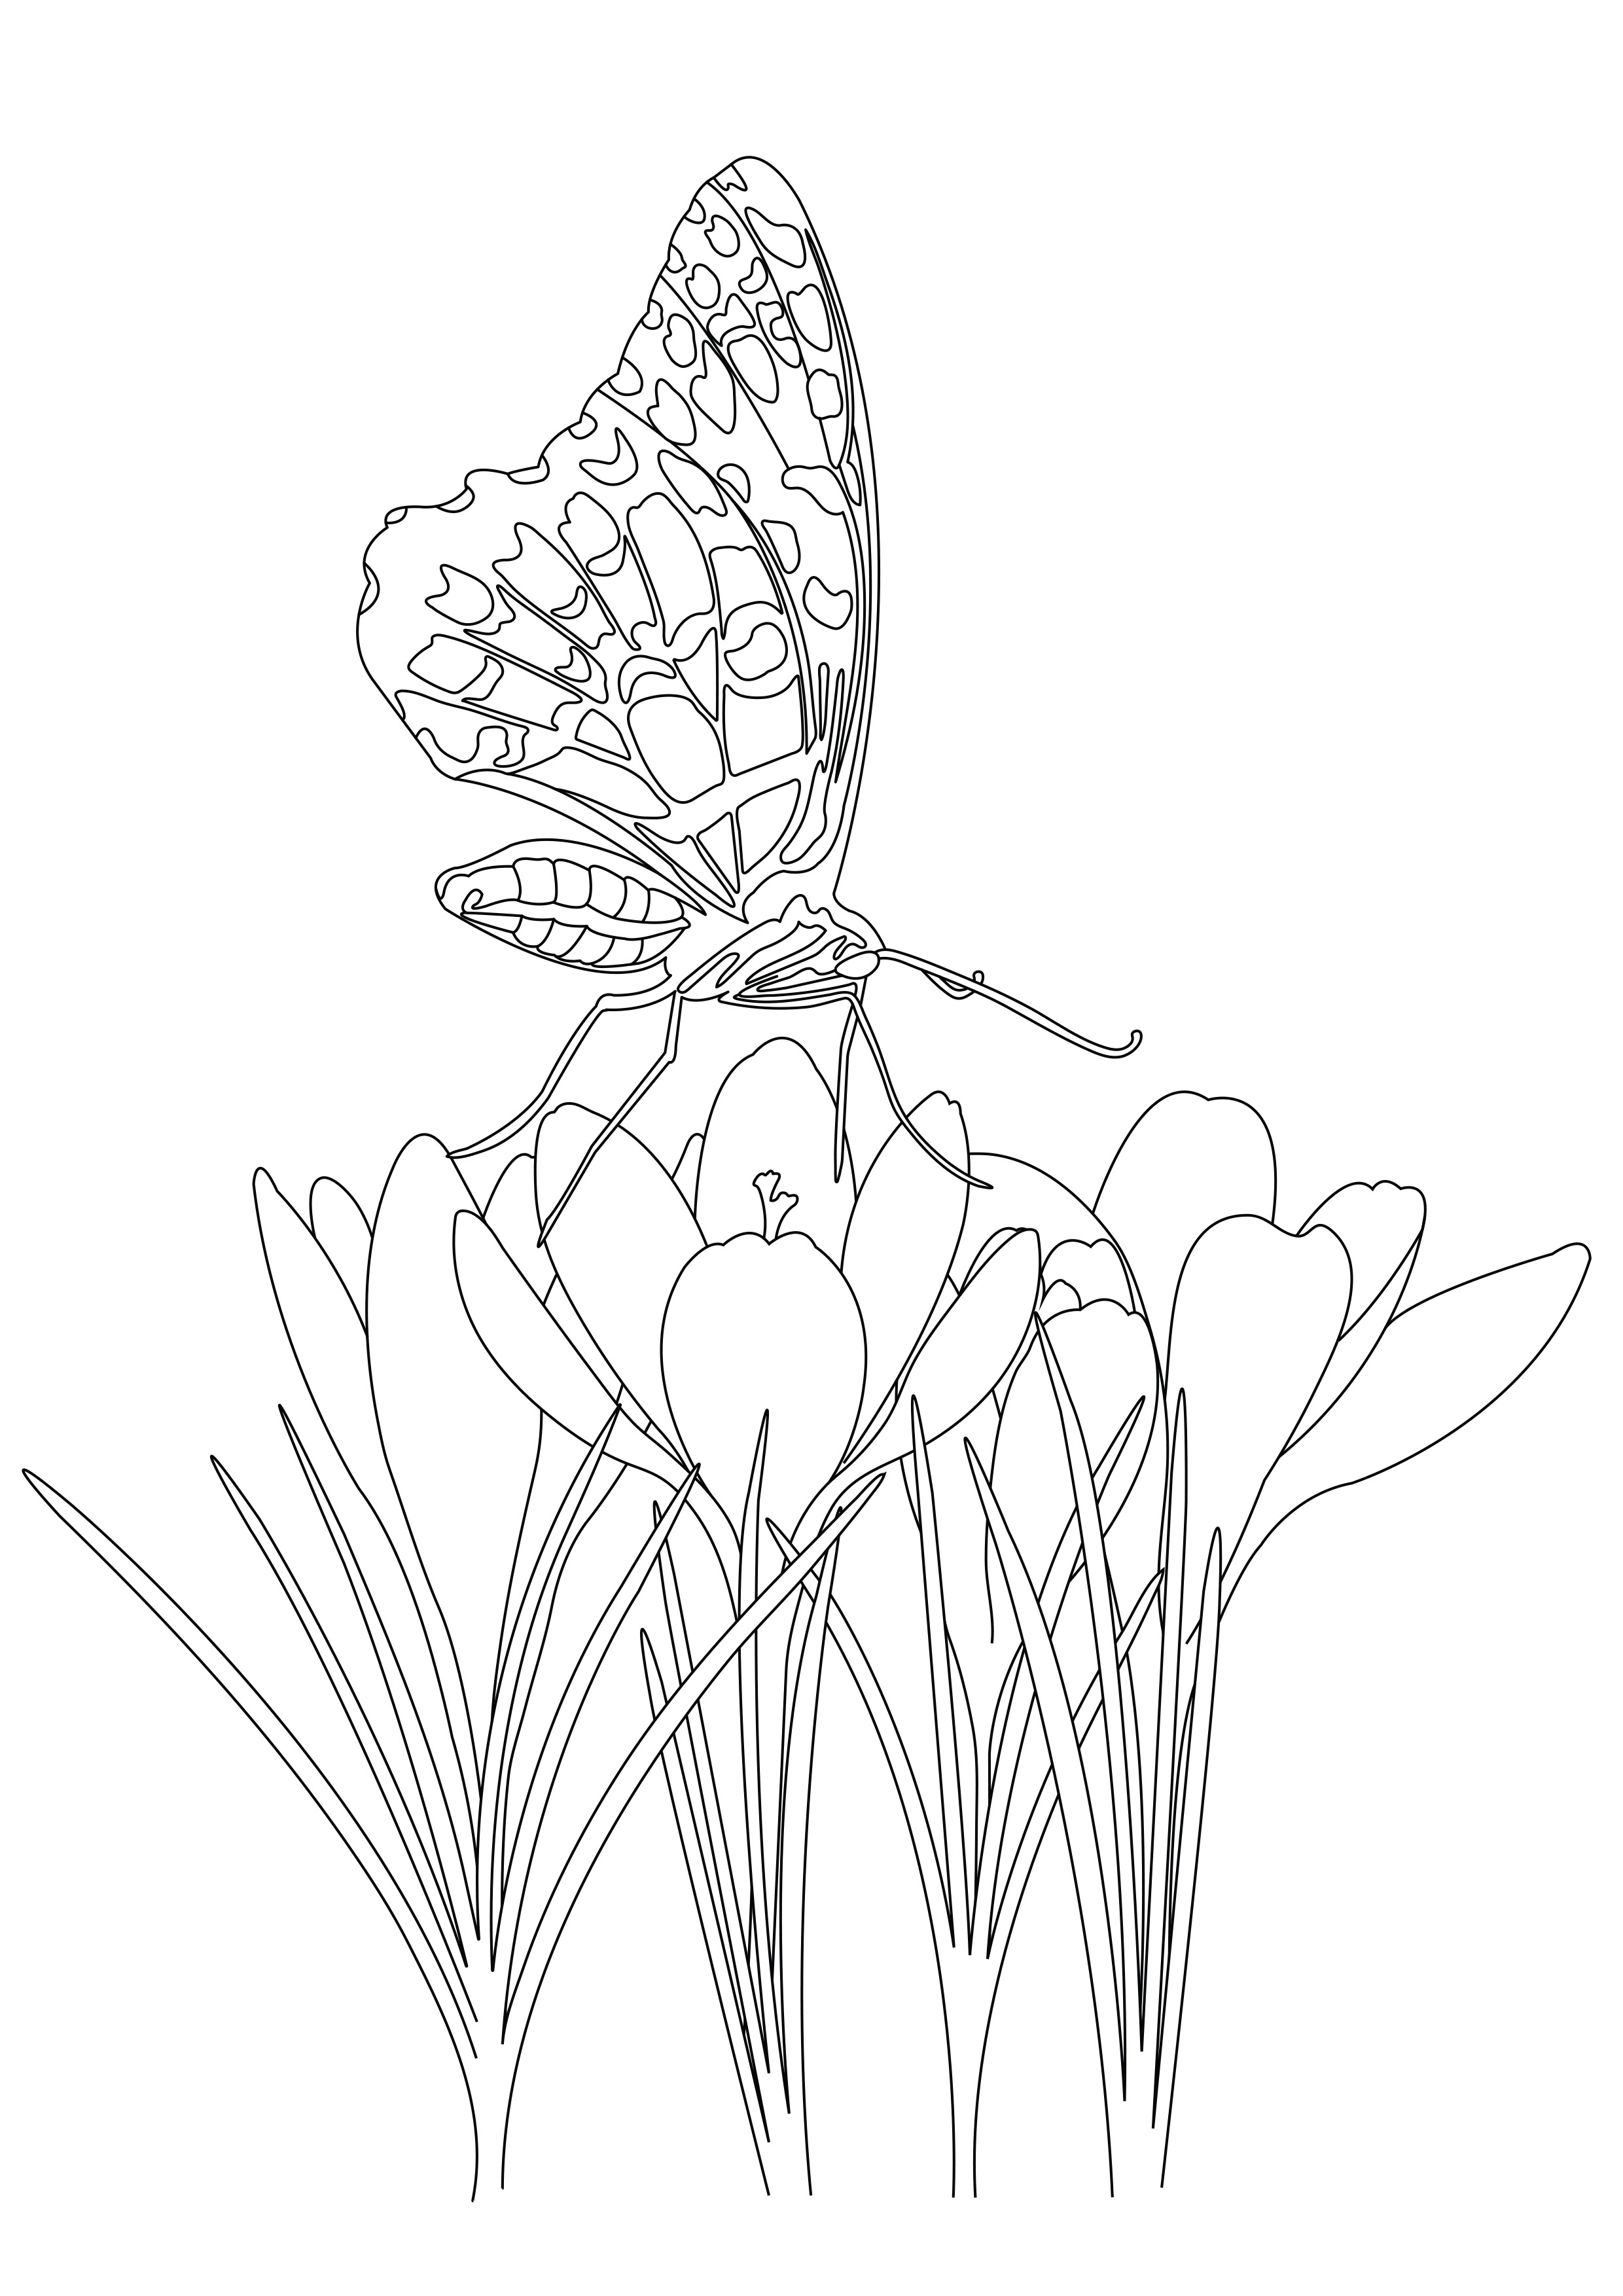 Butterfly on flowers - Butterflies & insects Adult Coloring Pages